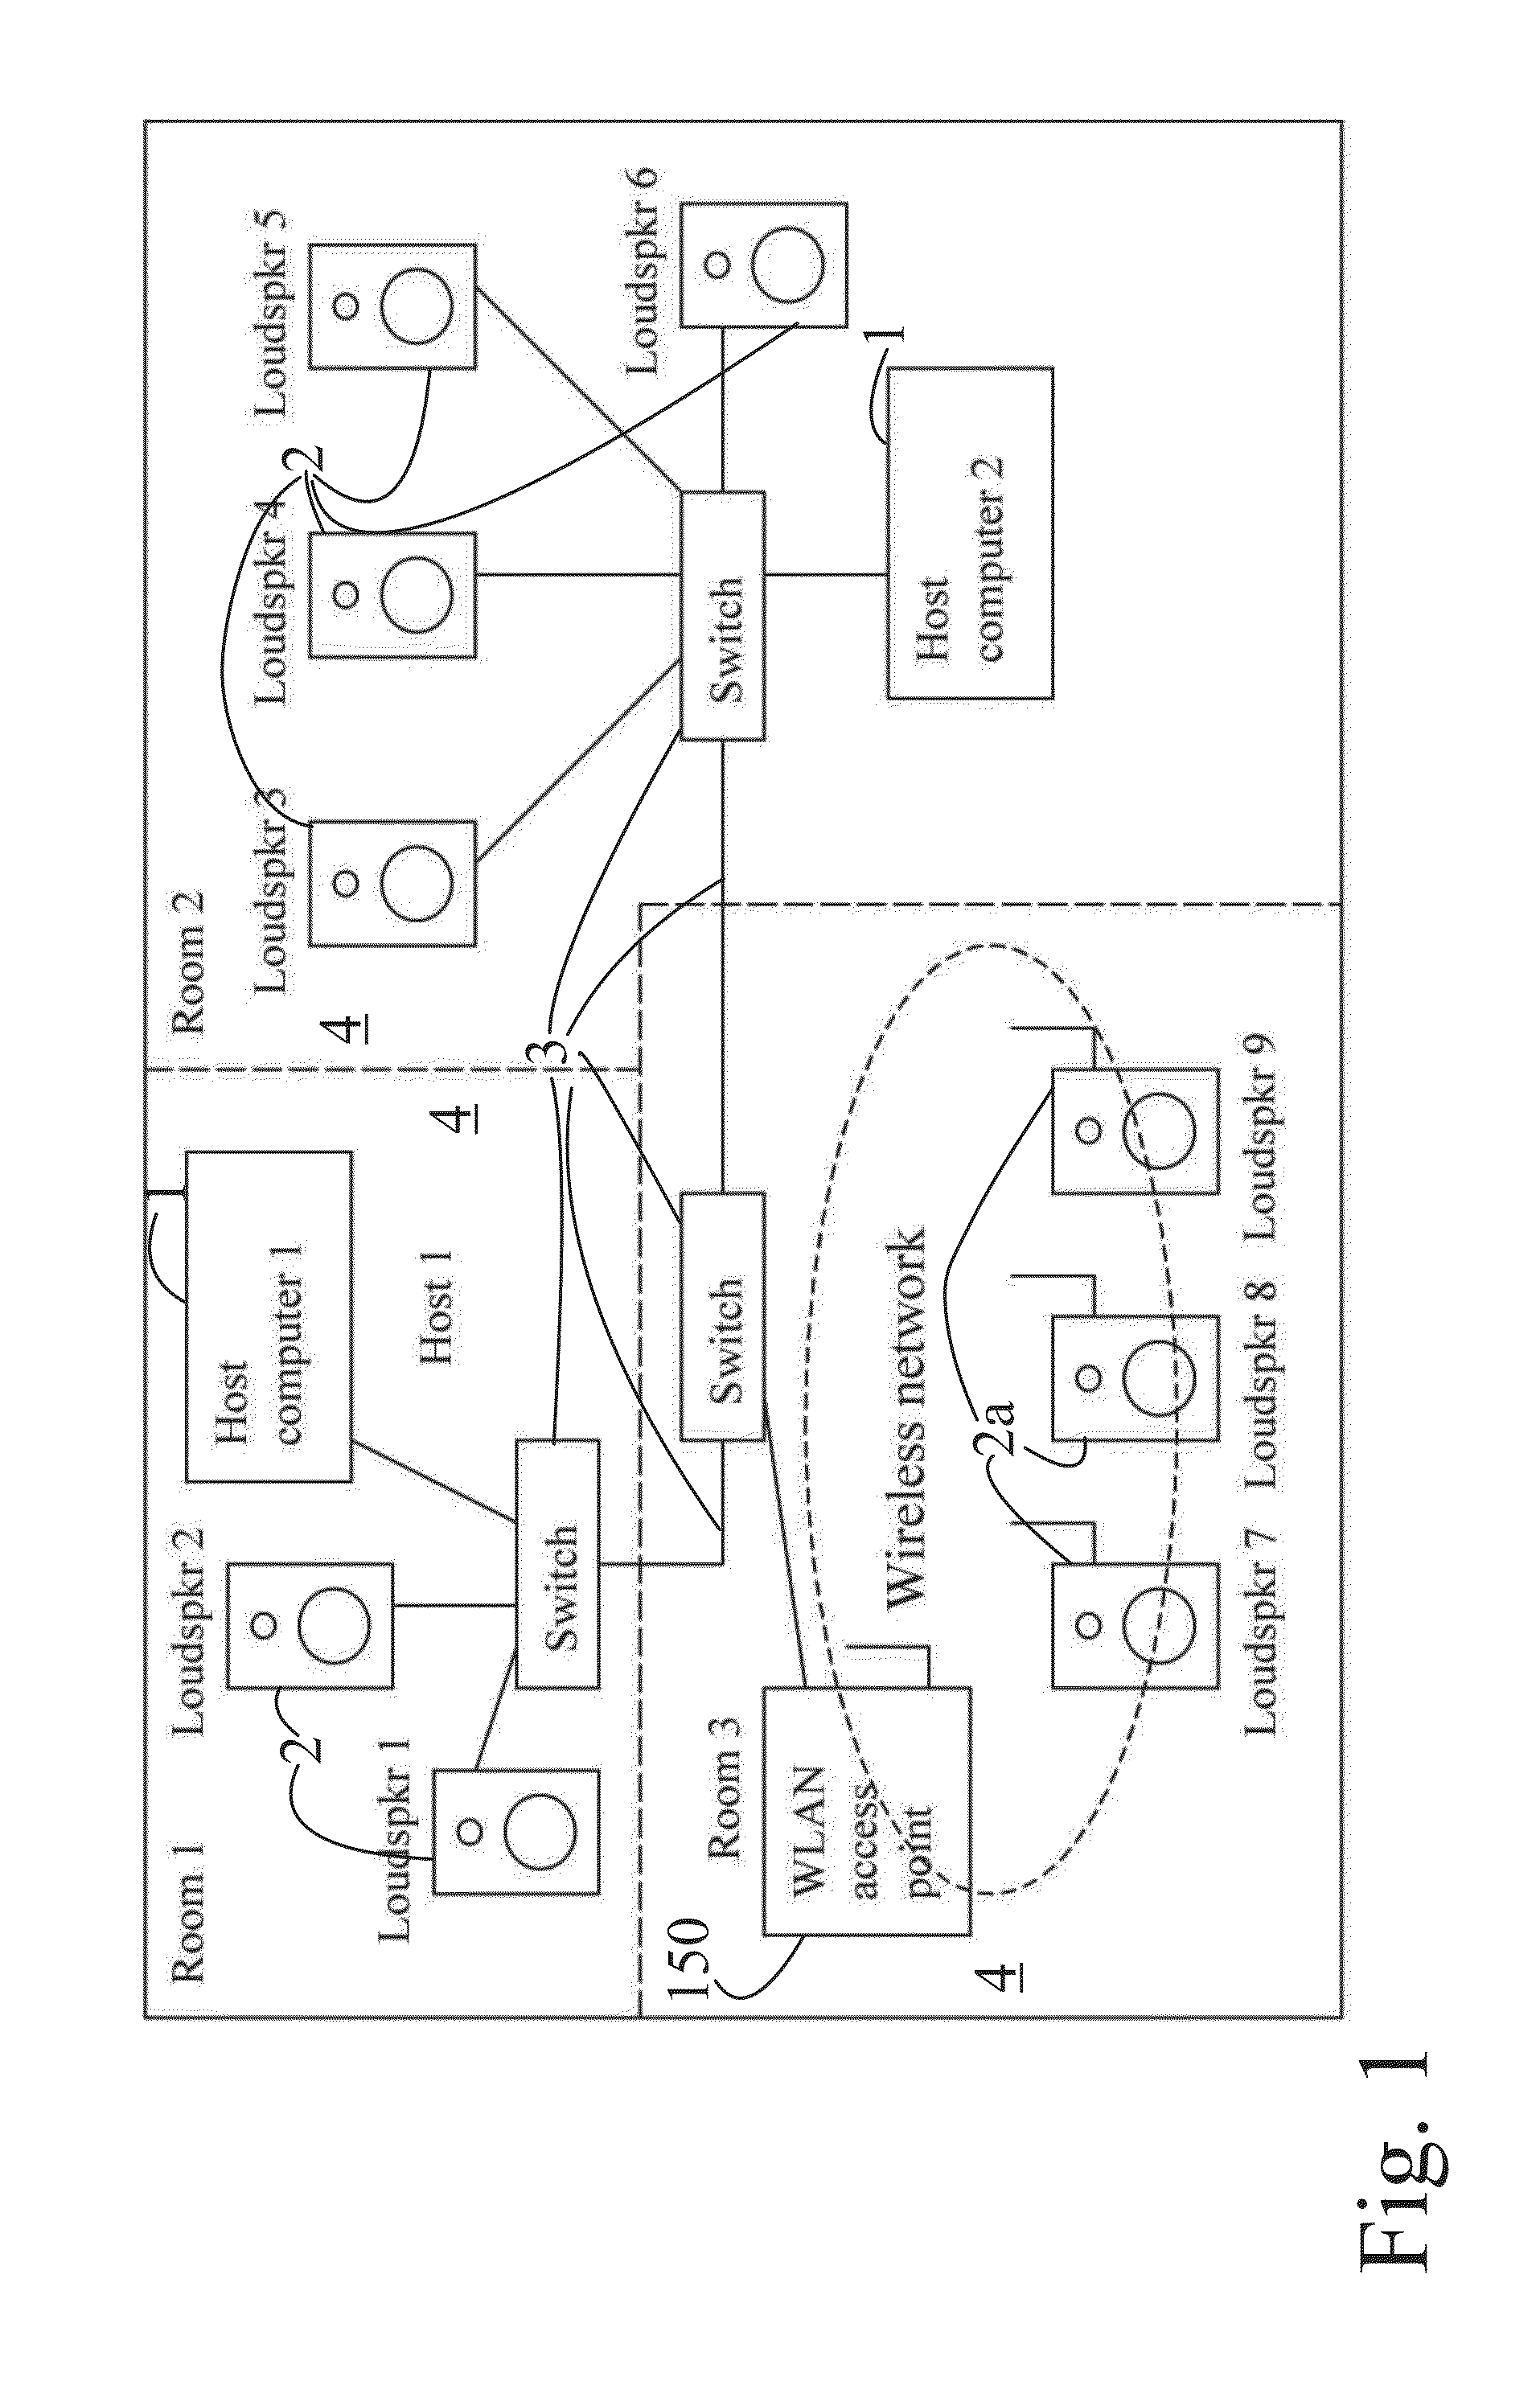 Data transfer method and system for loudspeakers in a digital sound reproduction system